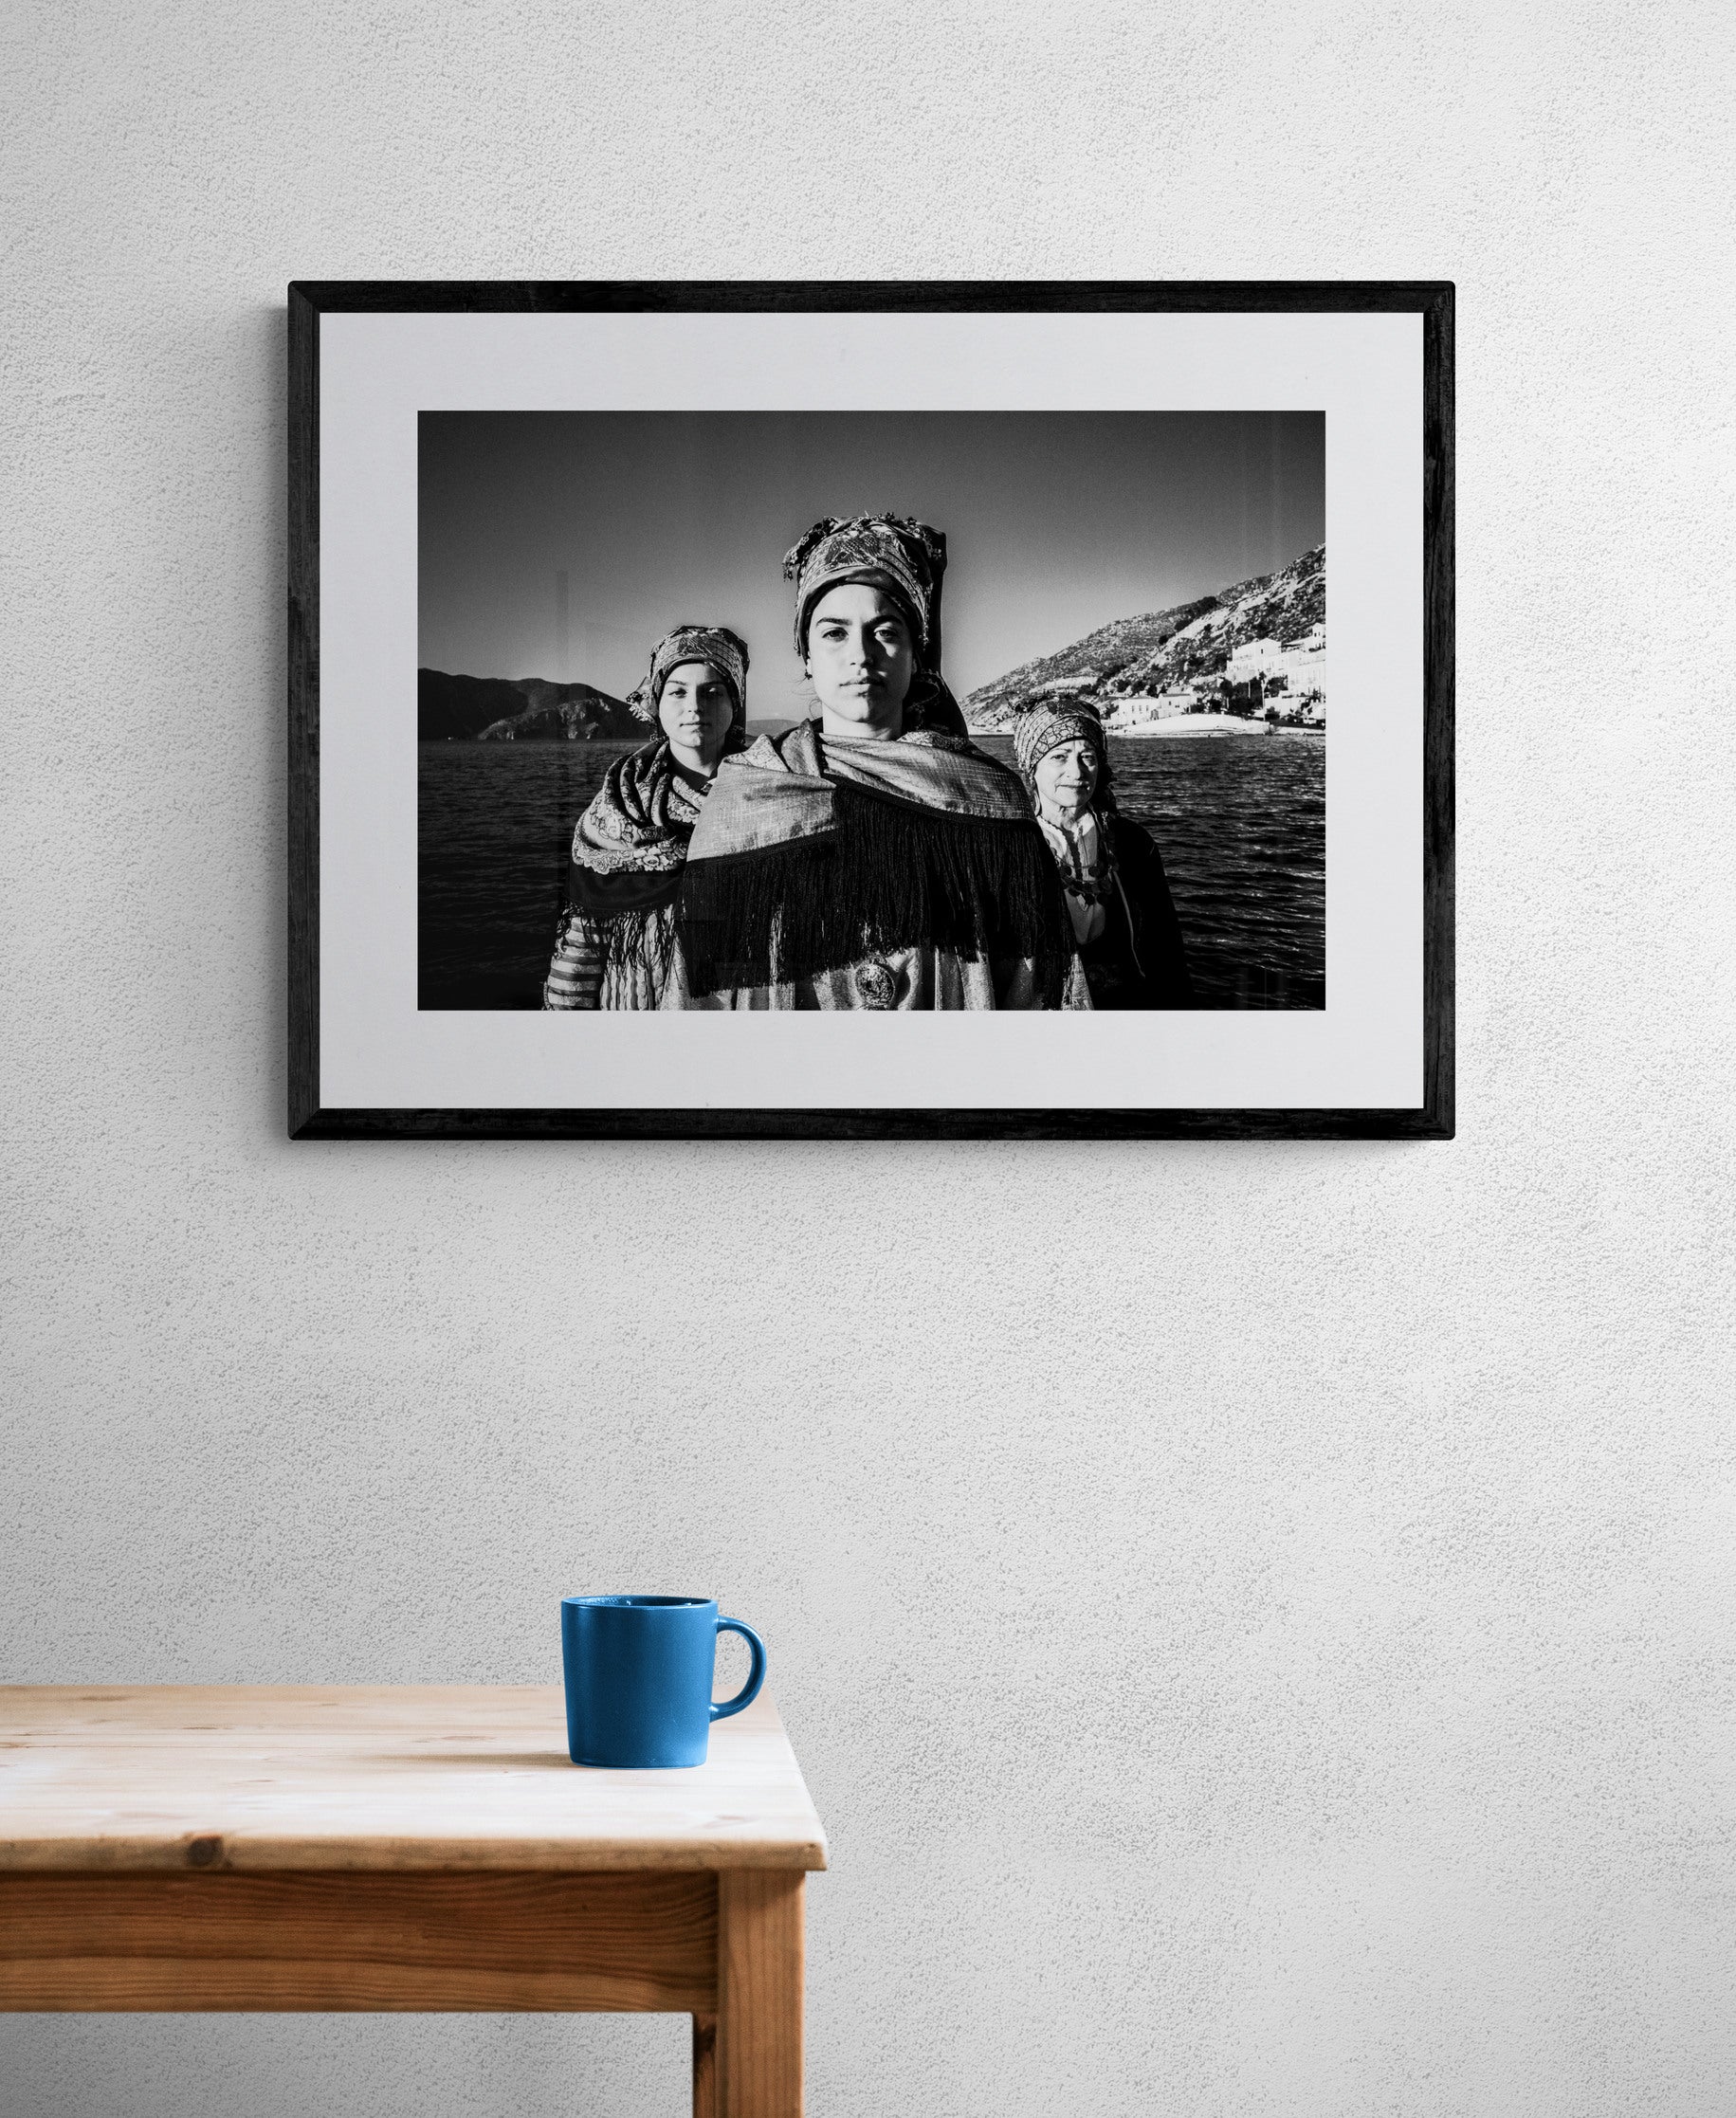 Black and White Photography Wall Art Greece | Three ladies on a boat in the traditional costumes of Symi island Dodecanese Greece by George Tatakis - single framed photo